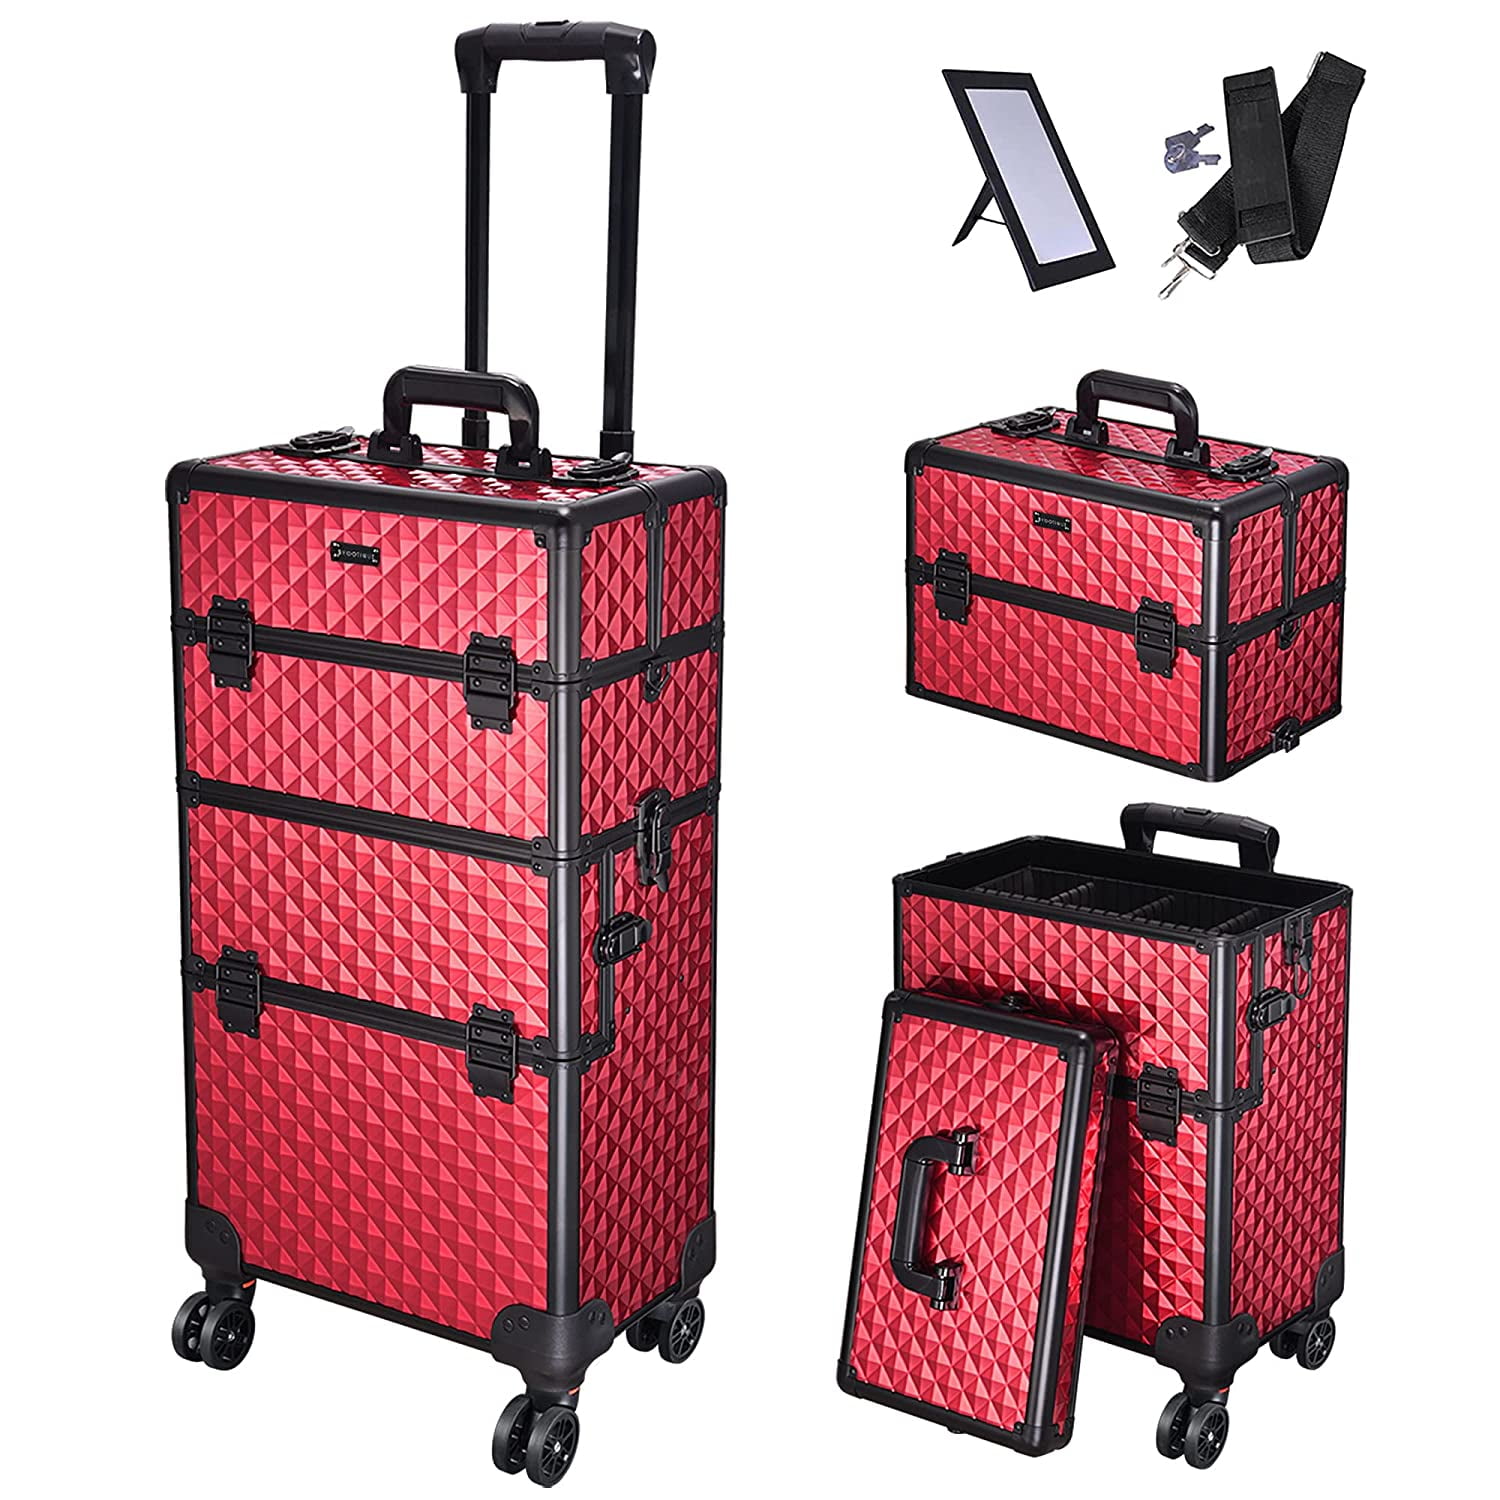 GUVSOETS Rolling Makeup Train Case 2 in1 Cosmetic Trolley with Storage box Aluminum Makeup Travel Case for Travel Salon Trolley Cosmetics Hairdressing (Classic Black) - Walmart.com